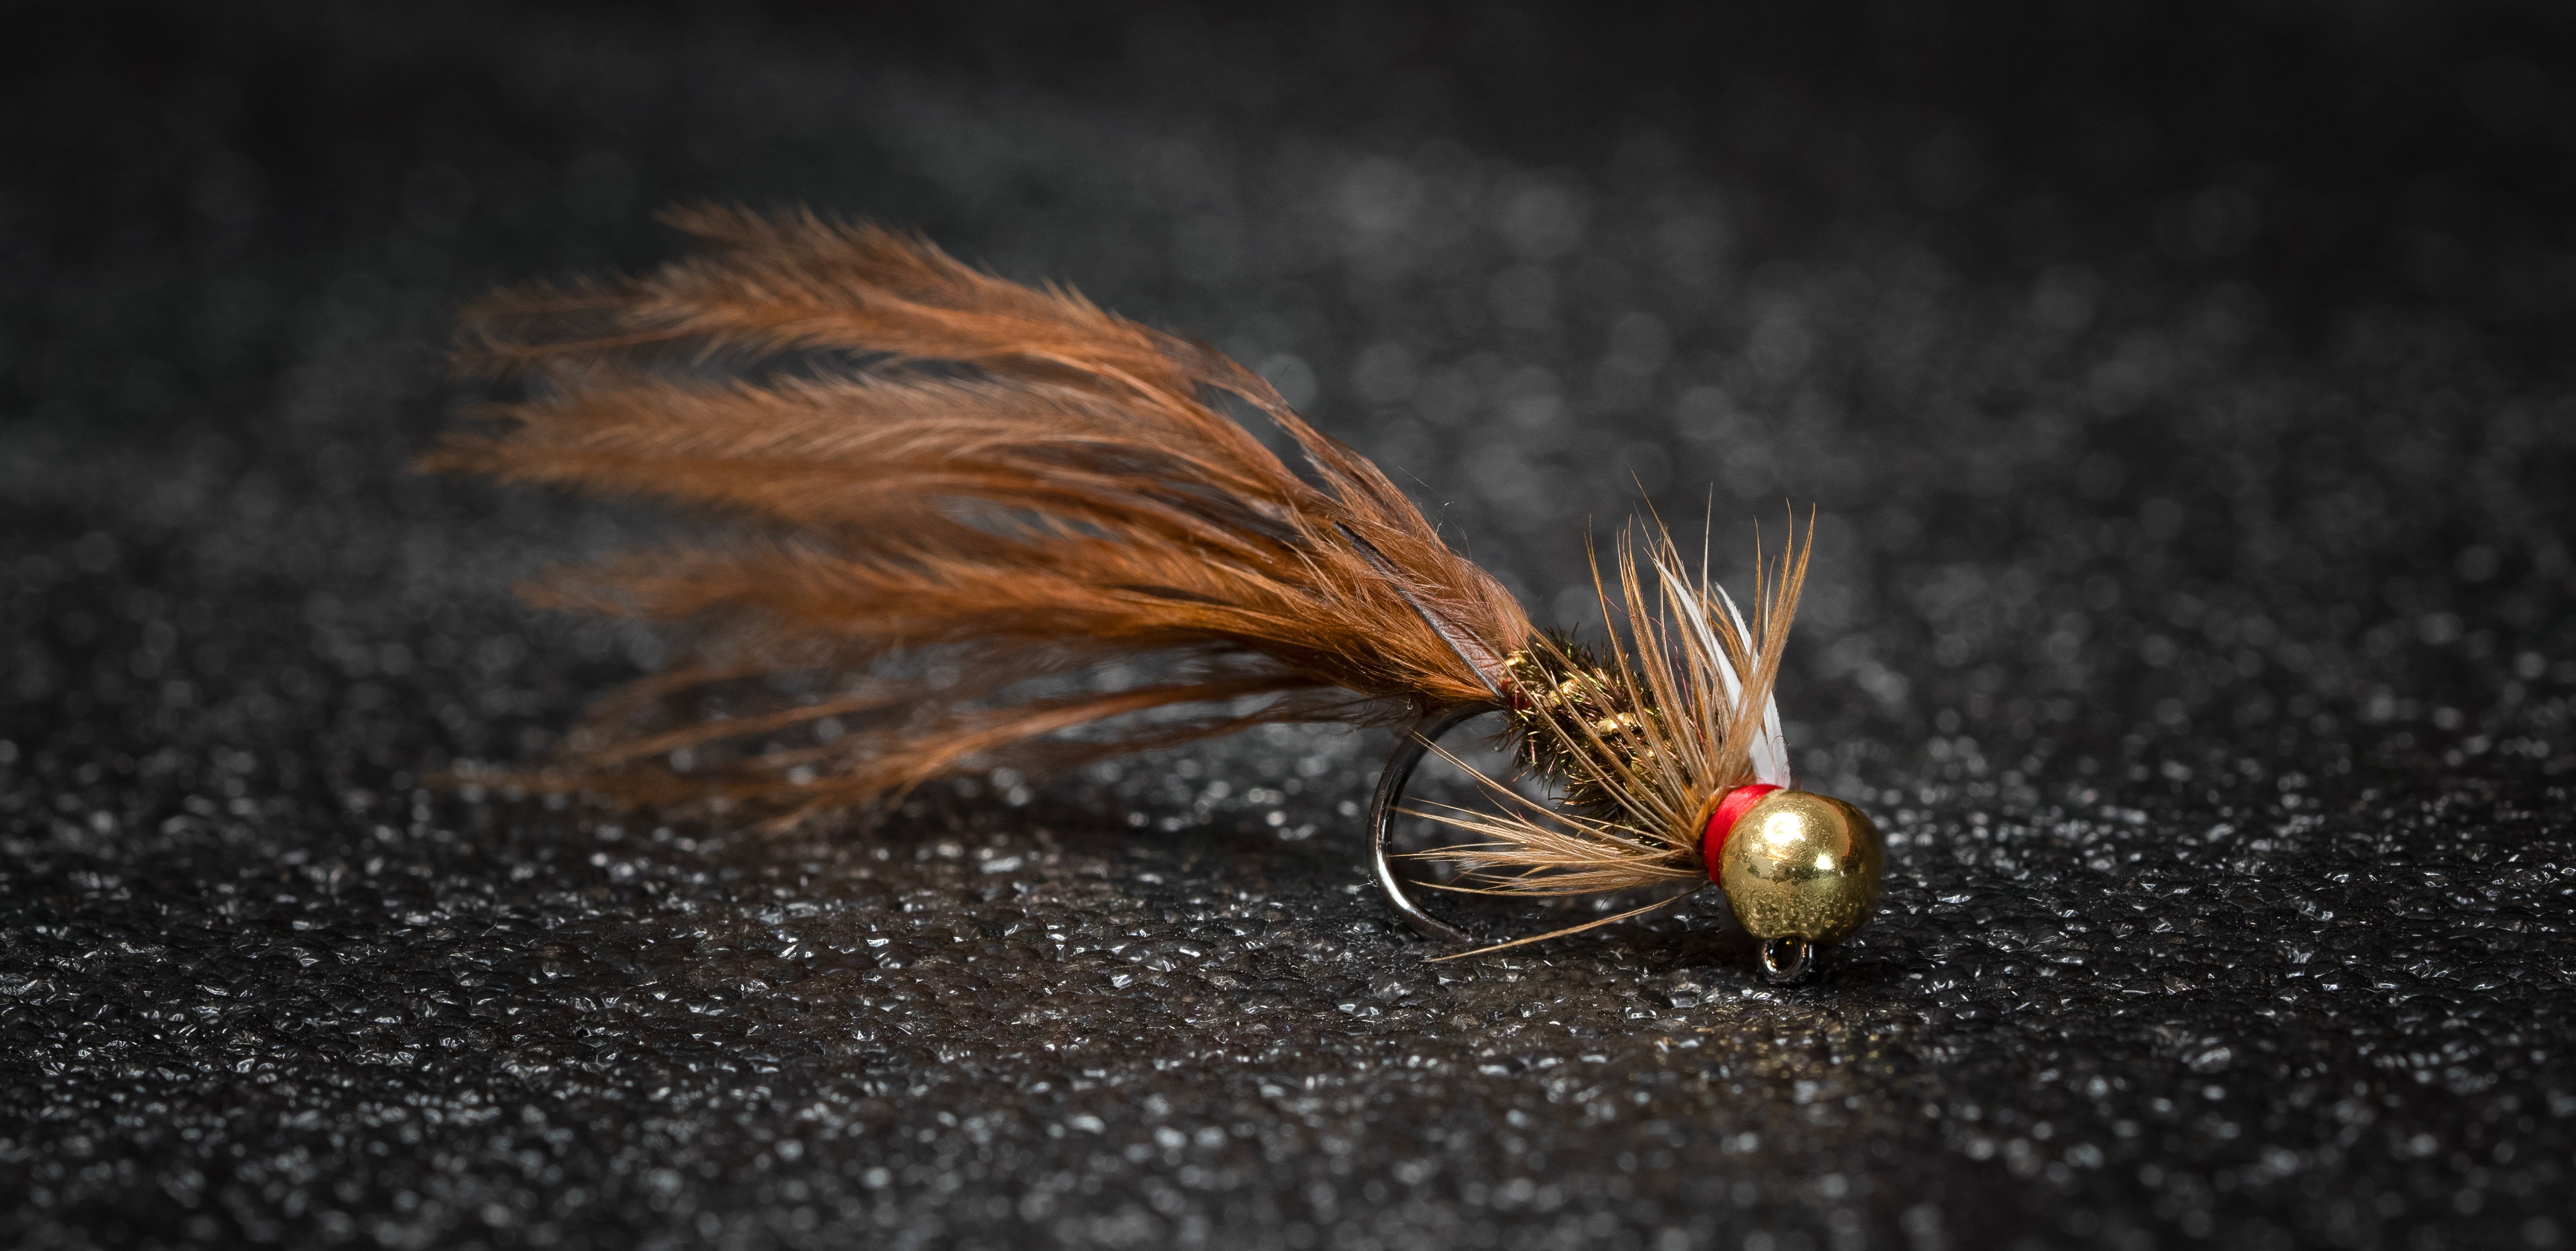 Thoughts on this original streamer? : r/flytying